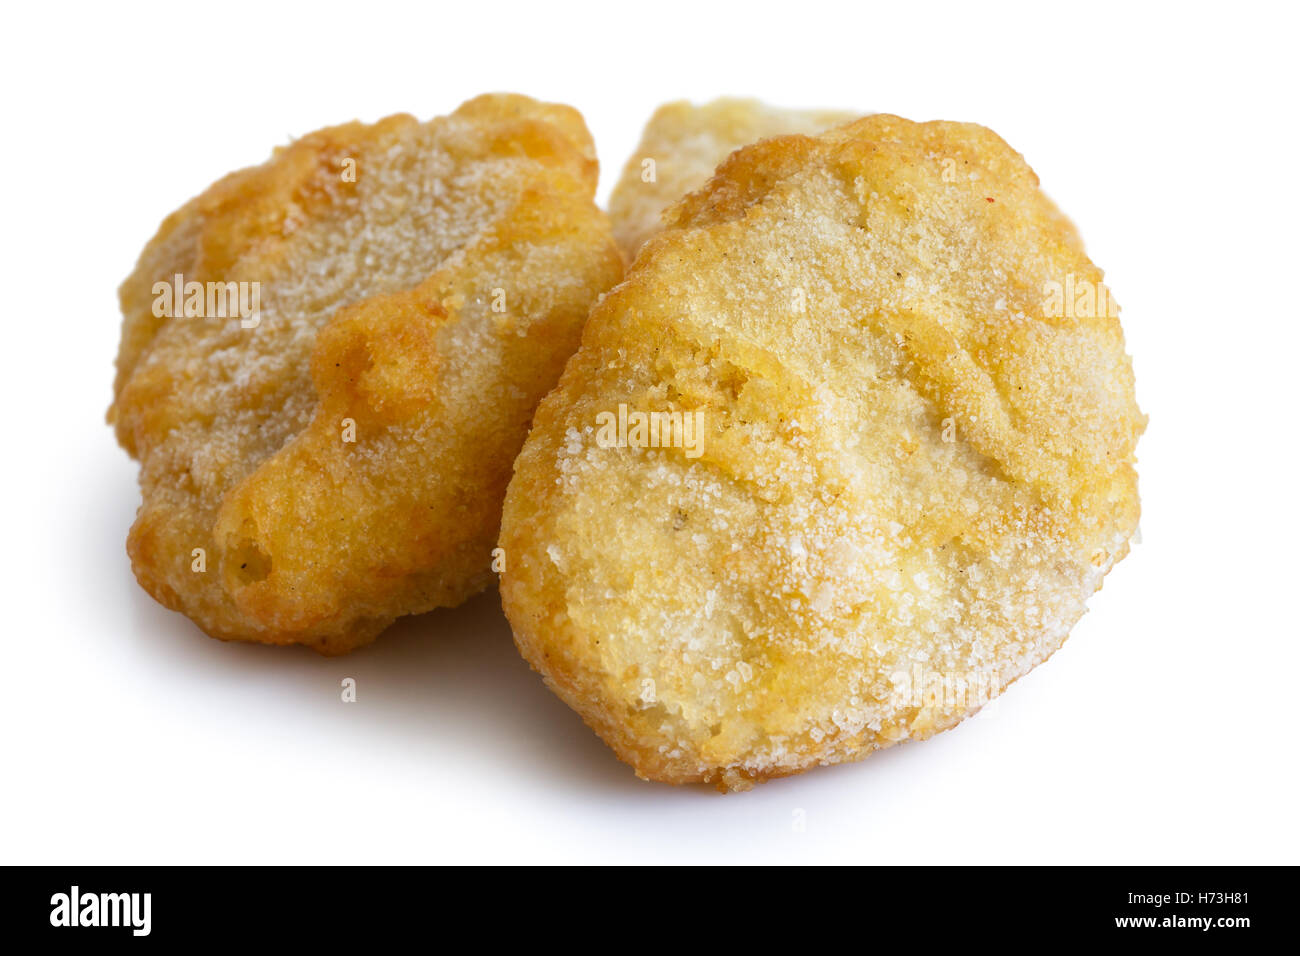 Frozen battered chicken nuggets uncooked and isolated on white in perspective. Stock Photo